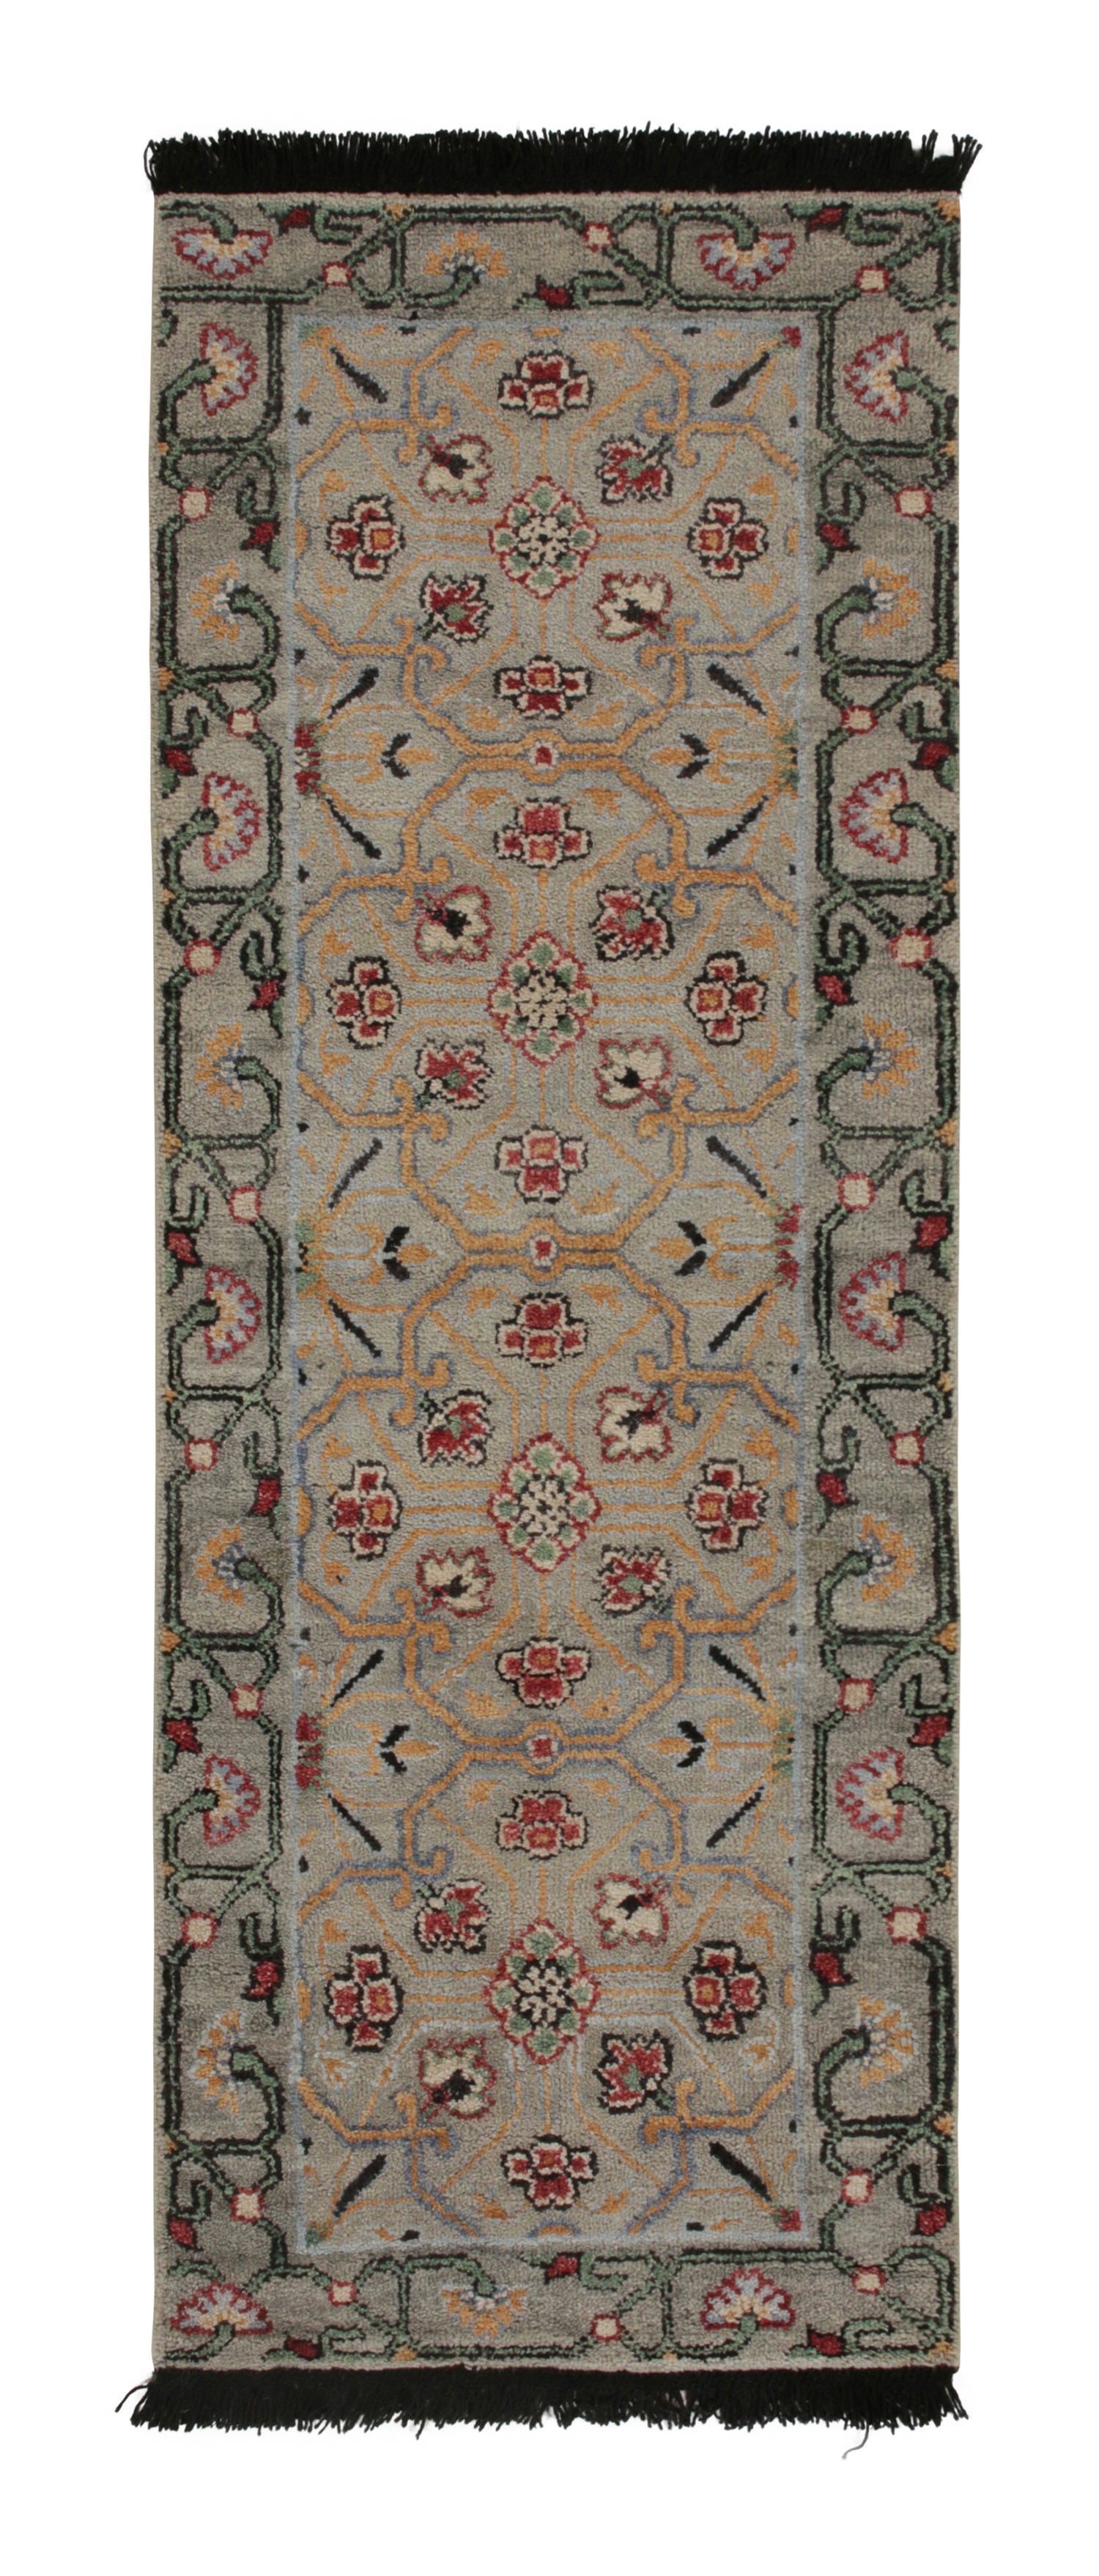 Rug & Kilim’s Classic Style Runner in Blue, Green and Red Floral Patterns For Sale